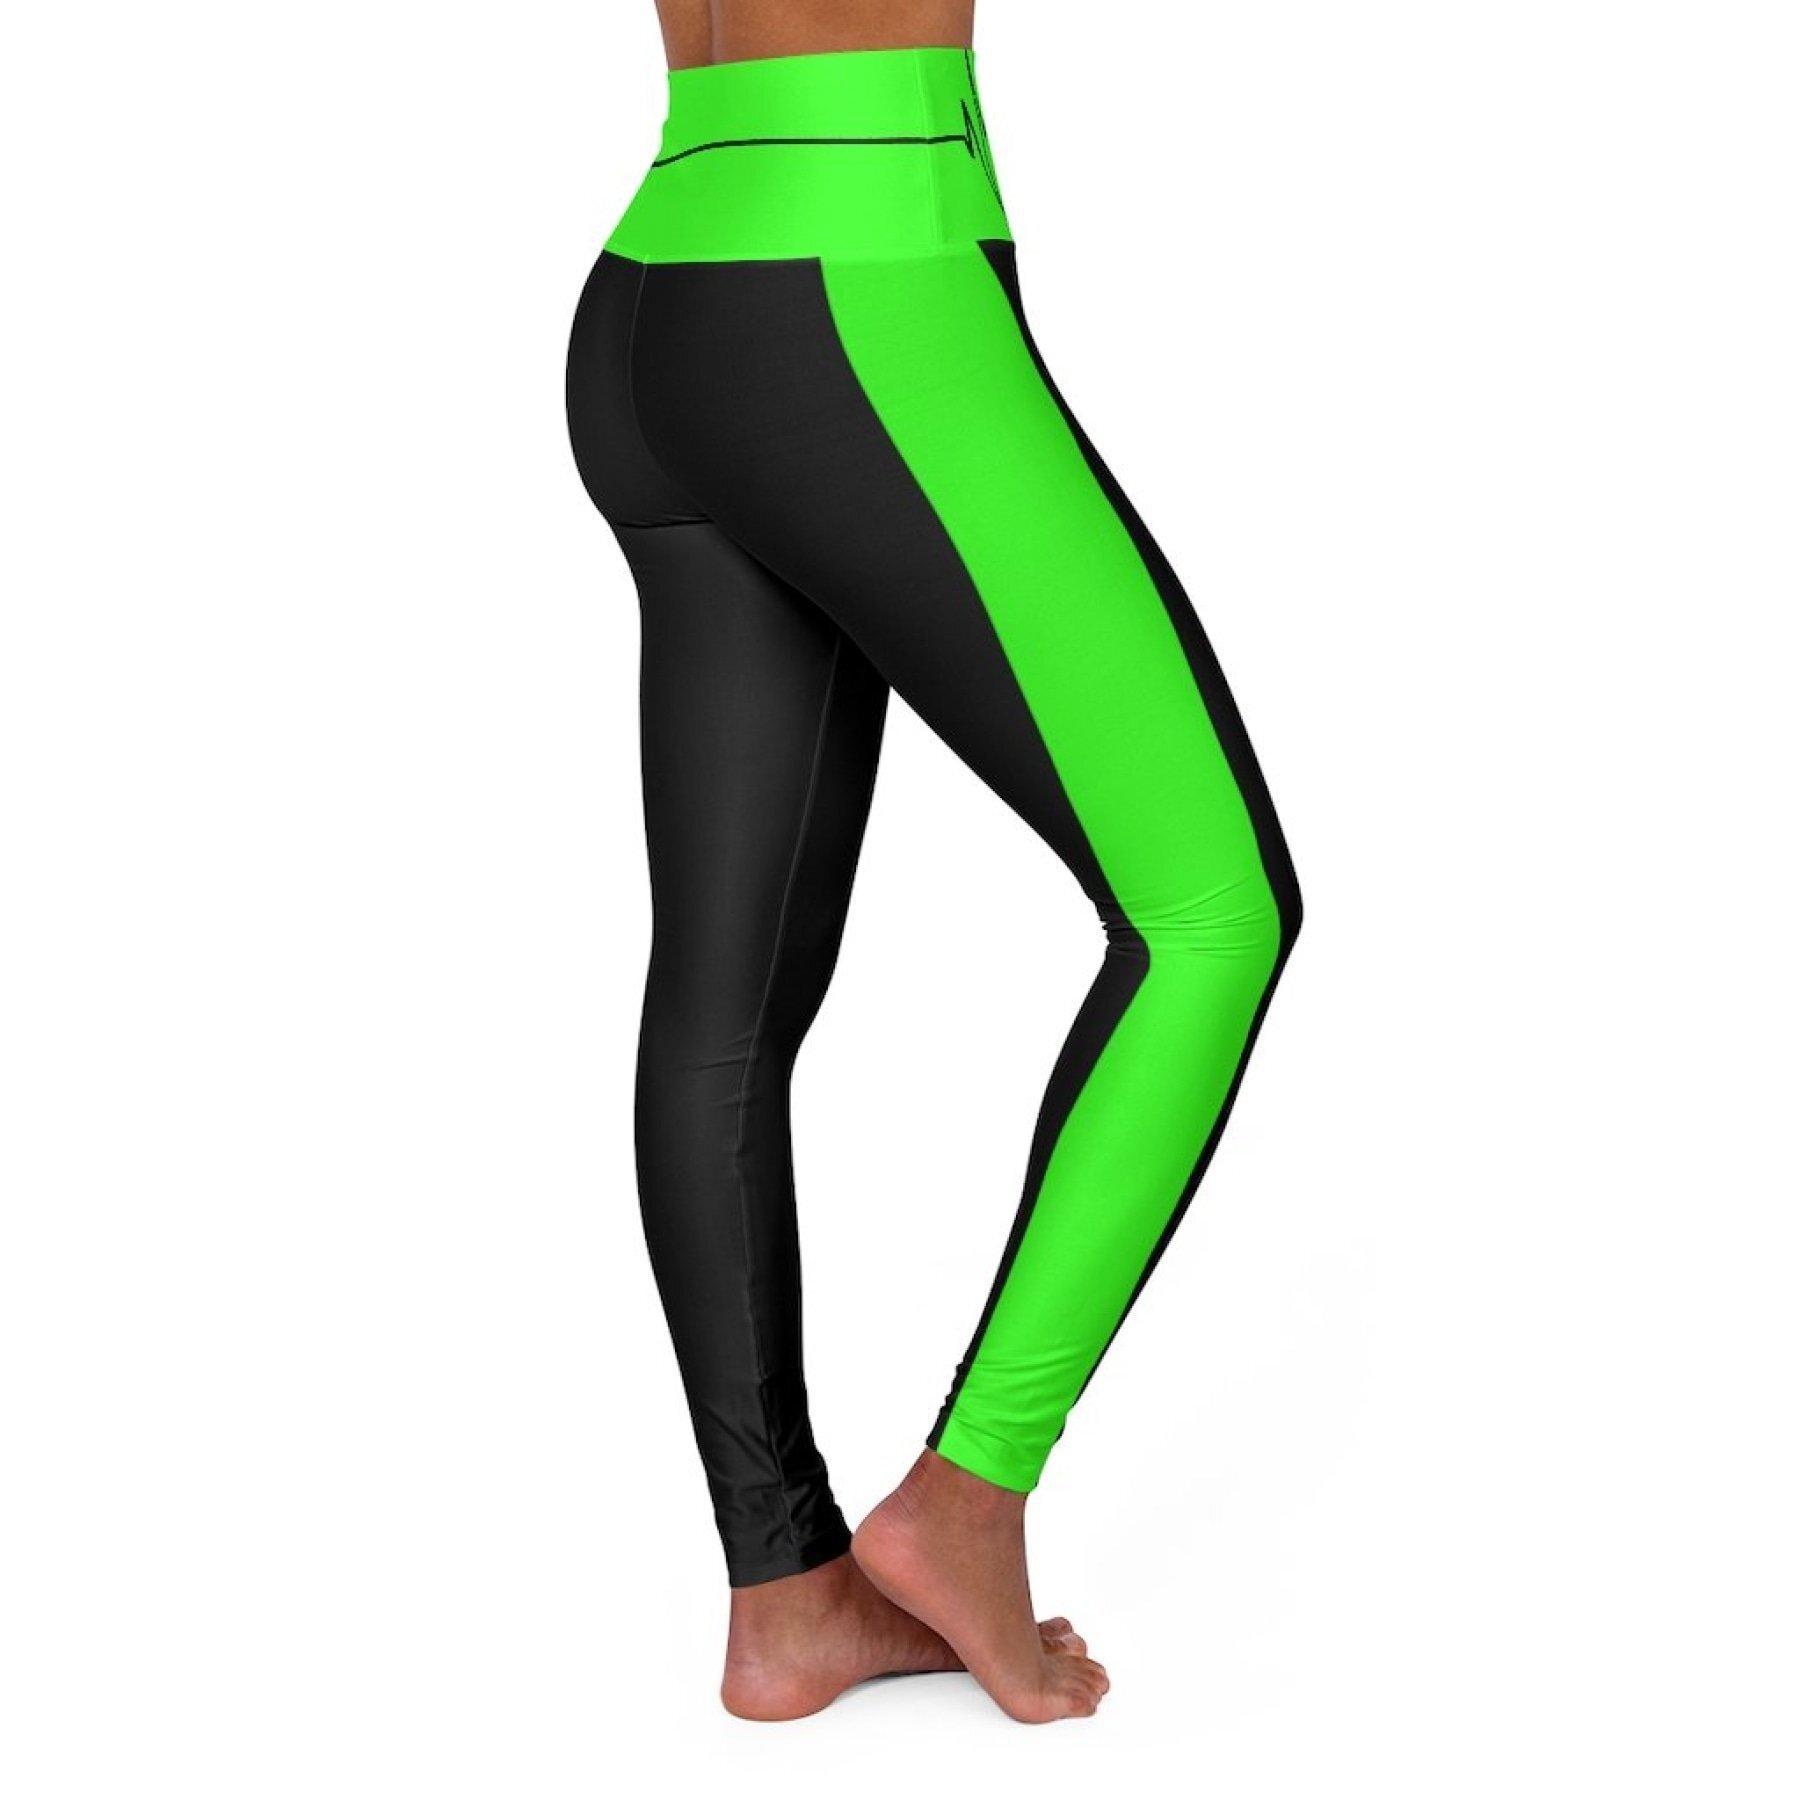 High Waisted Yoga Leggings, Black And Neon Green Beating Heart Sports Pants  - Youarrived